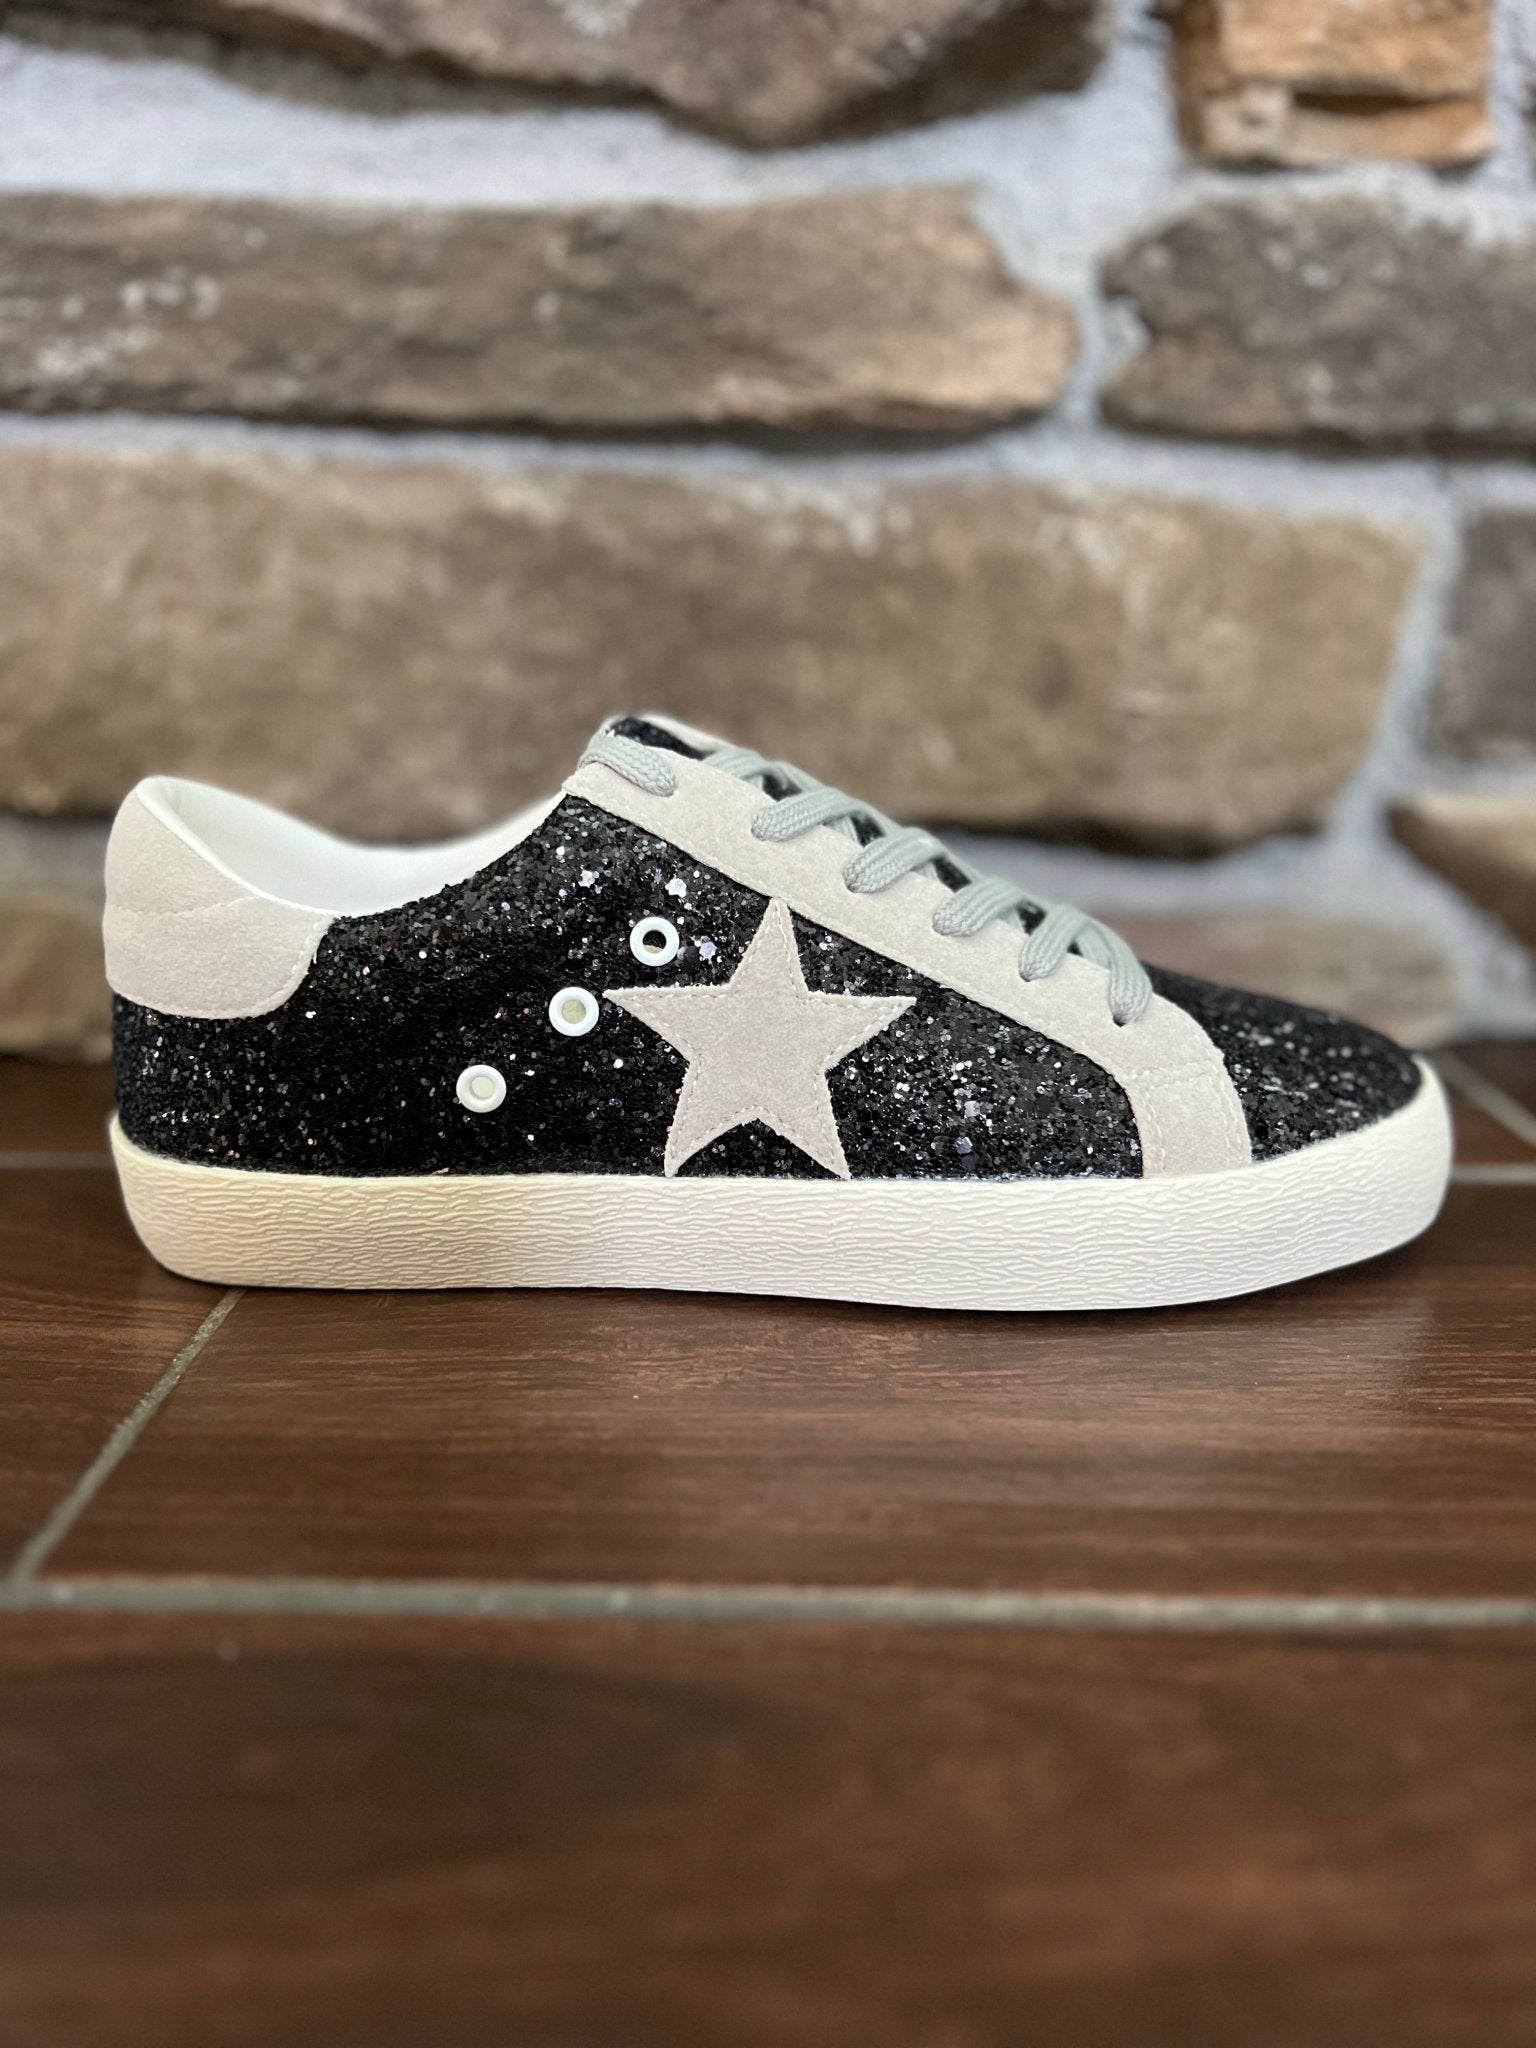 Black Stylish Sneakers - Polished Boutique